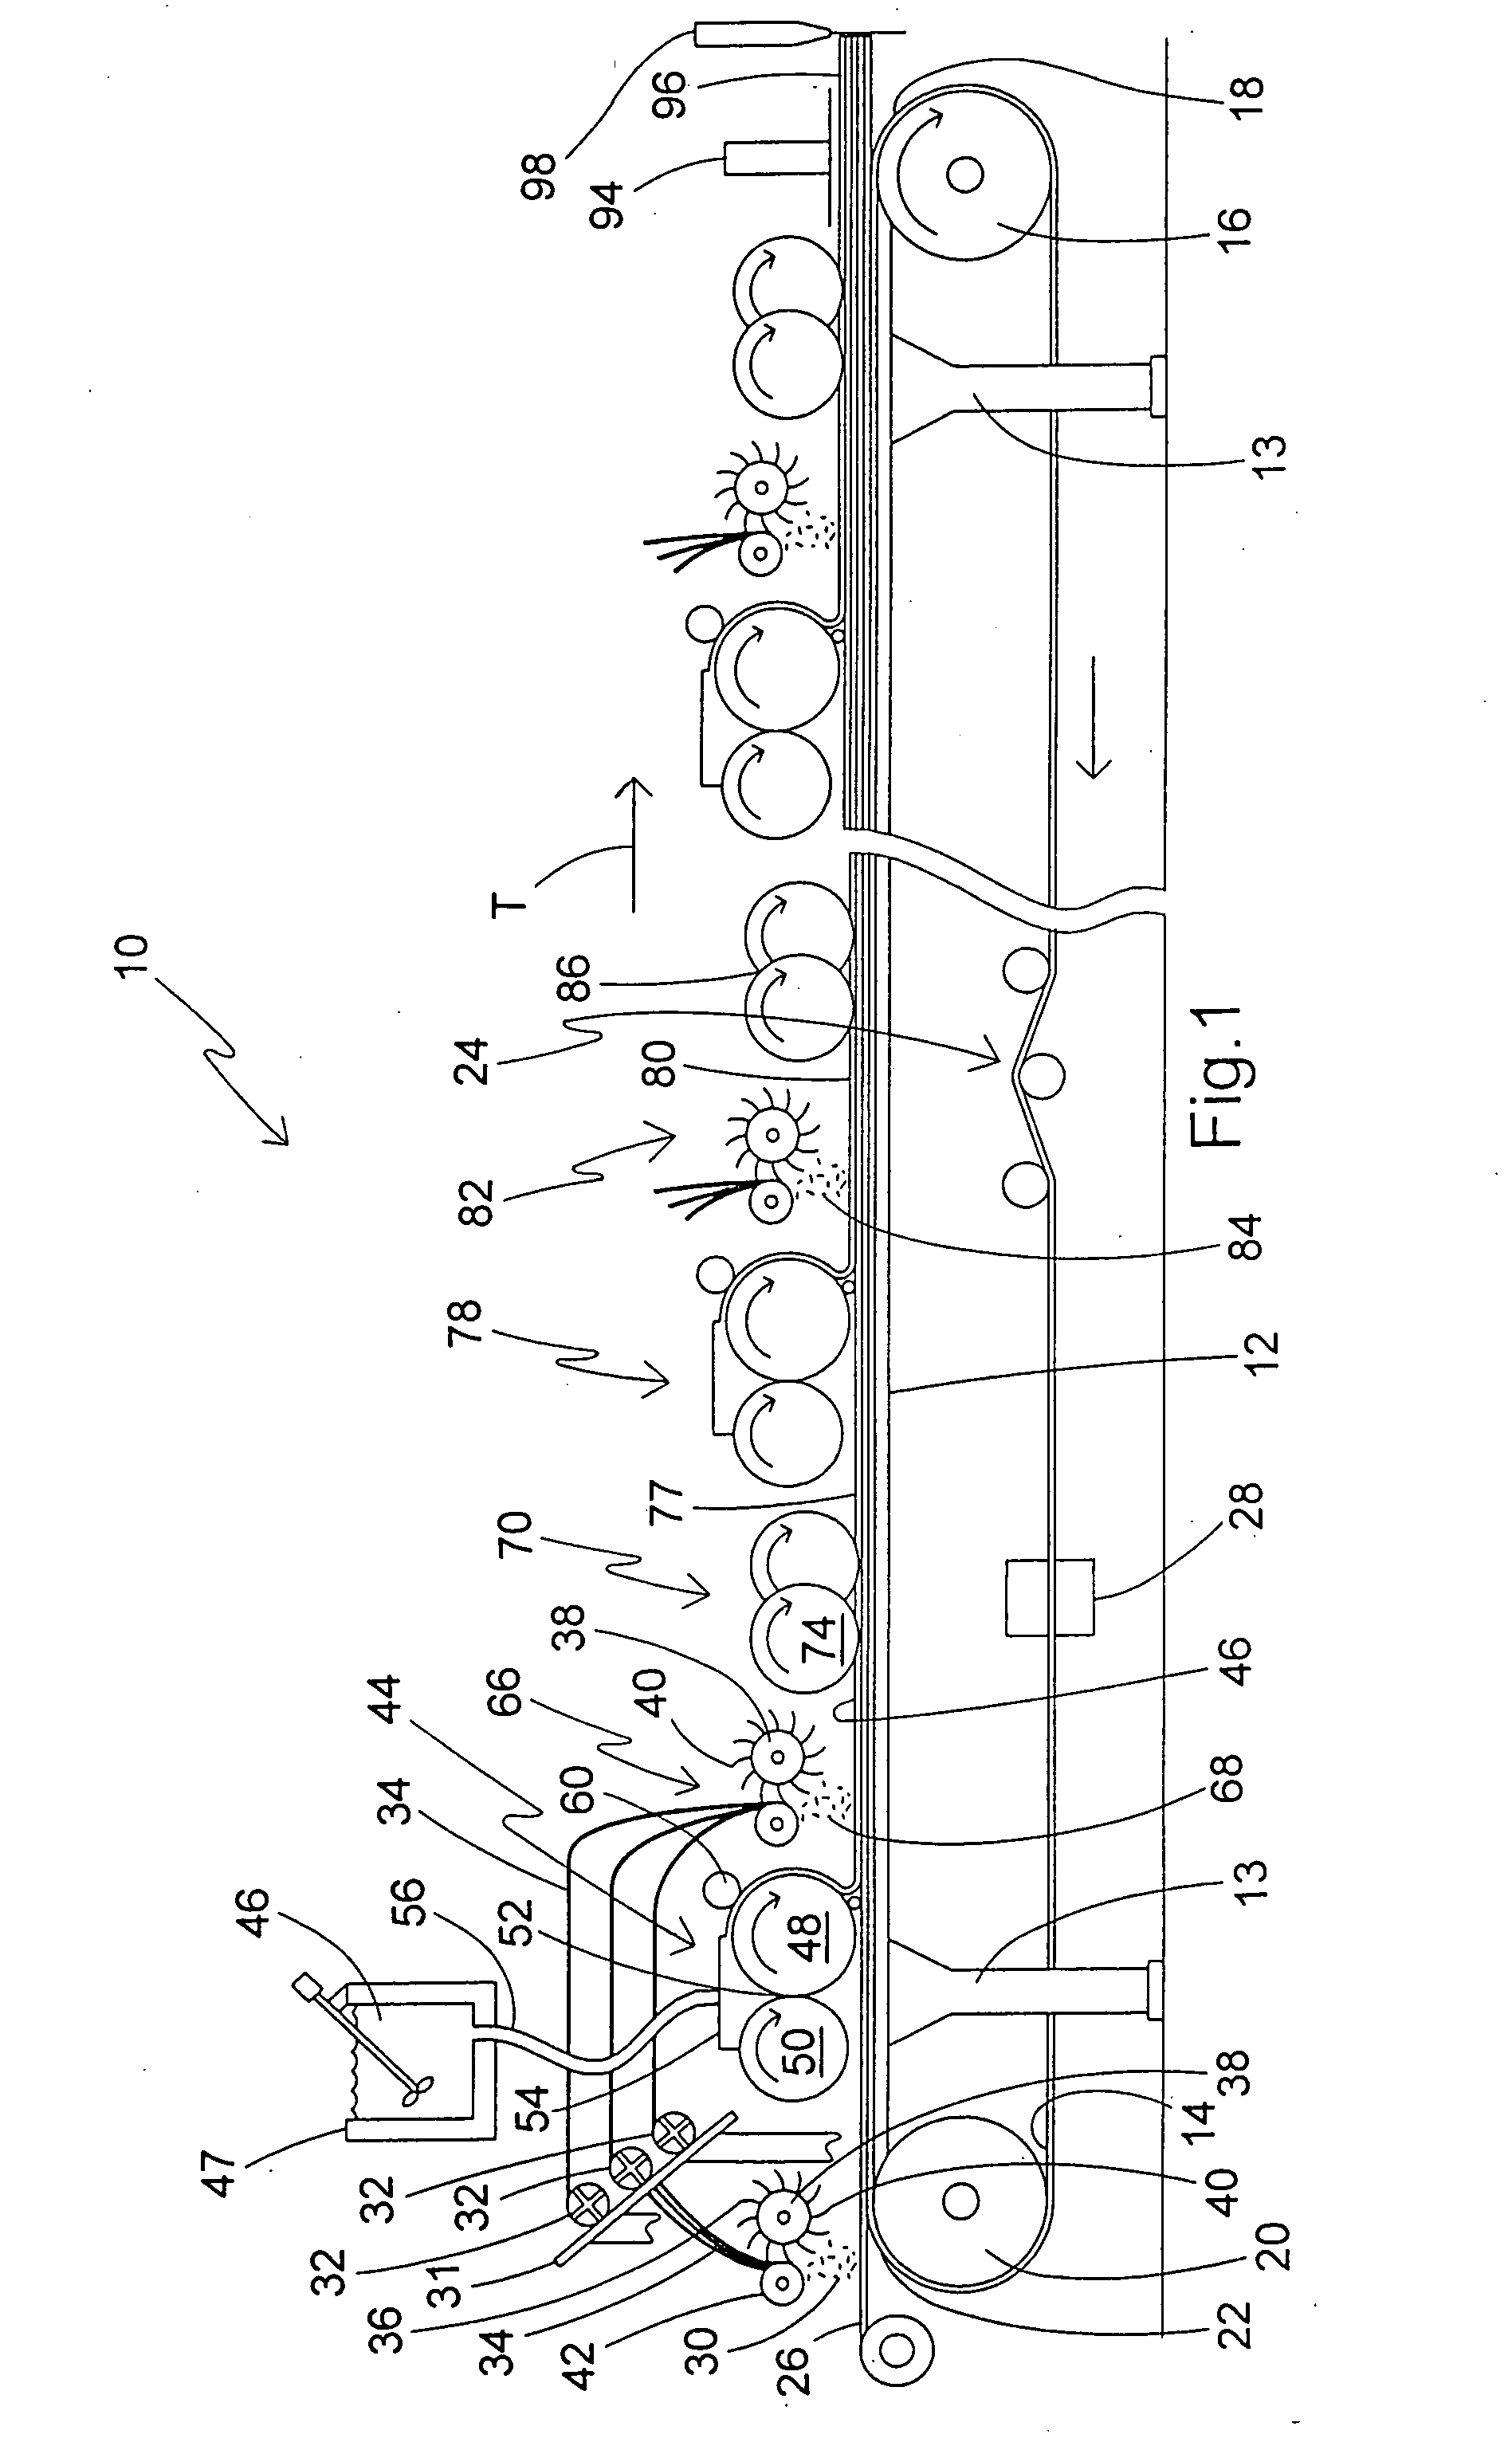 Multi-layer process and apparatus for producing high strength fiber-reinforced structural cementitious panels